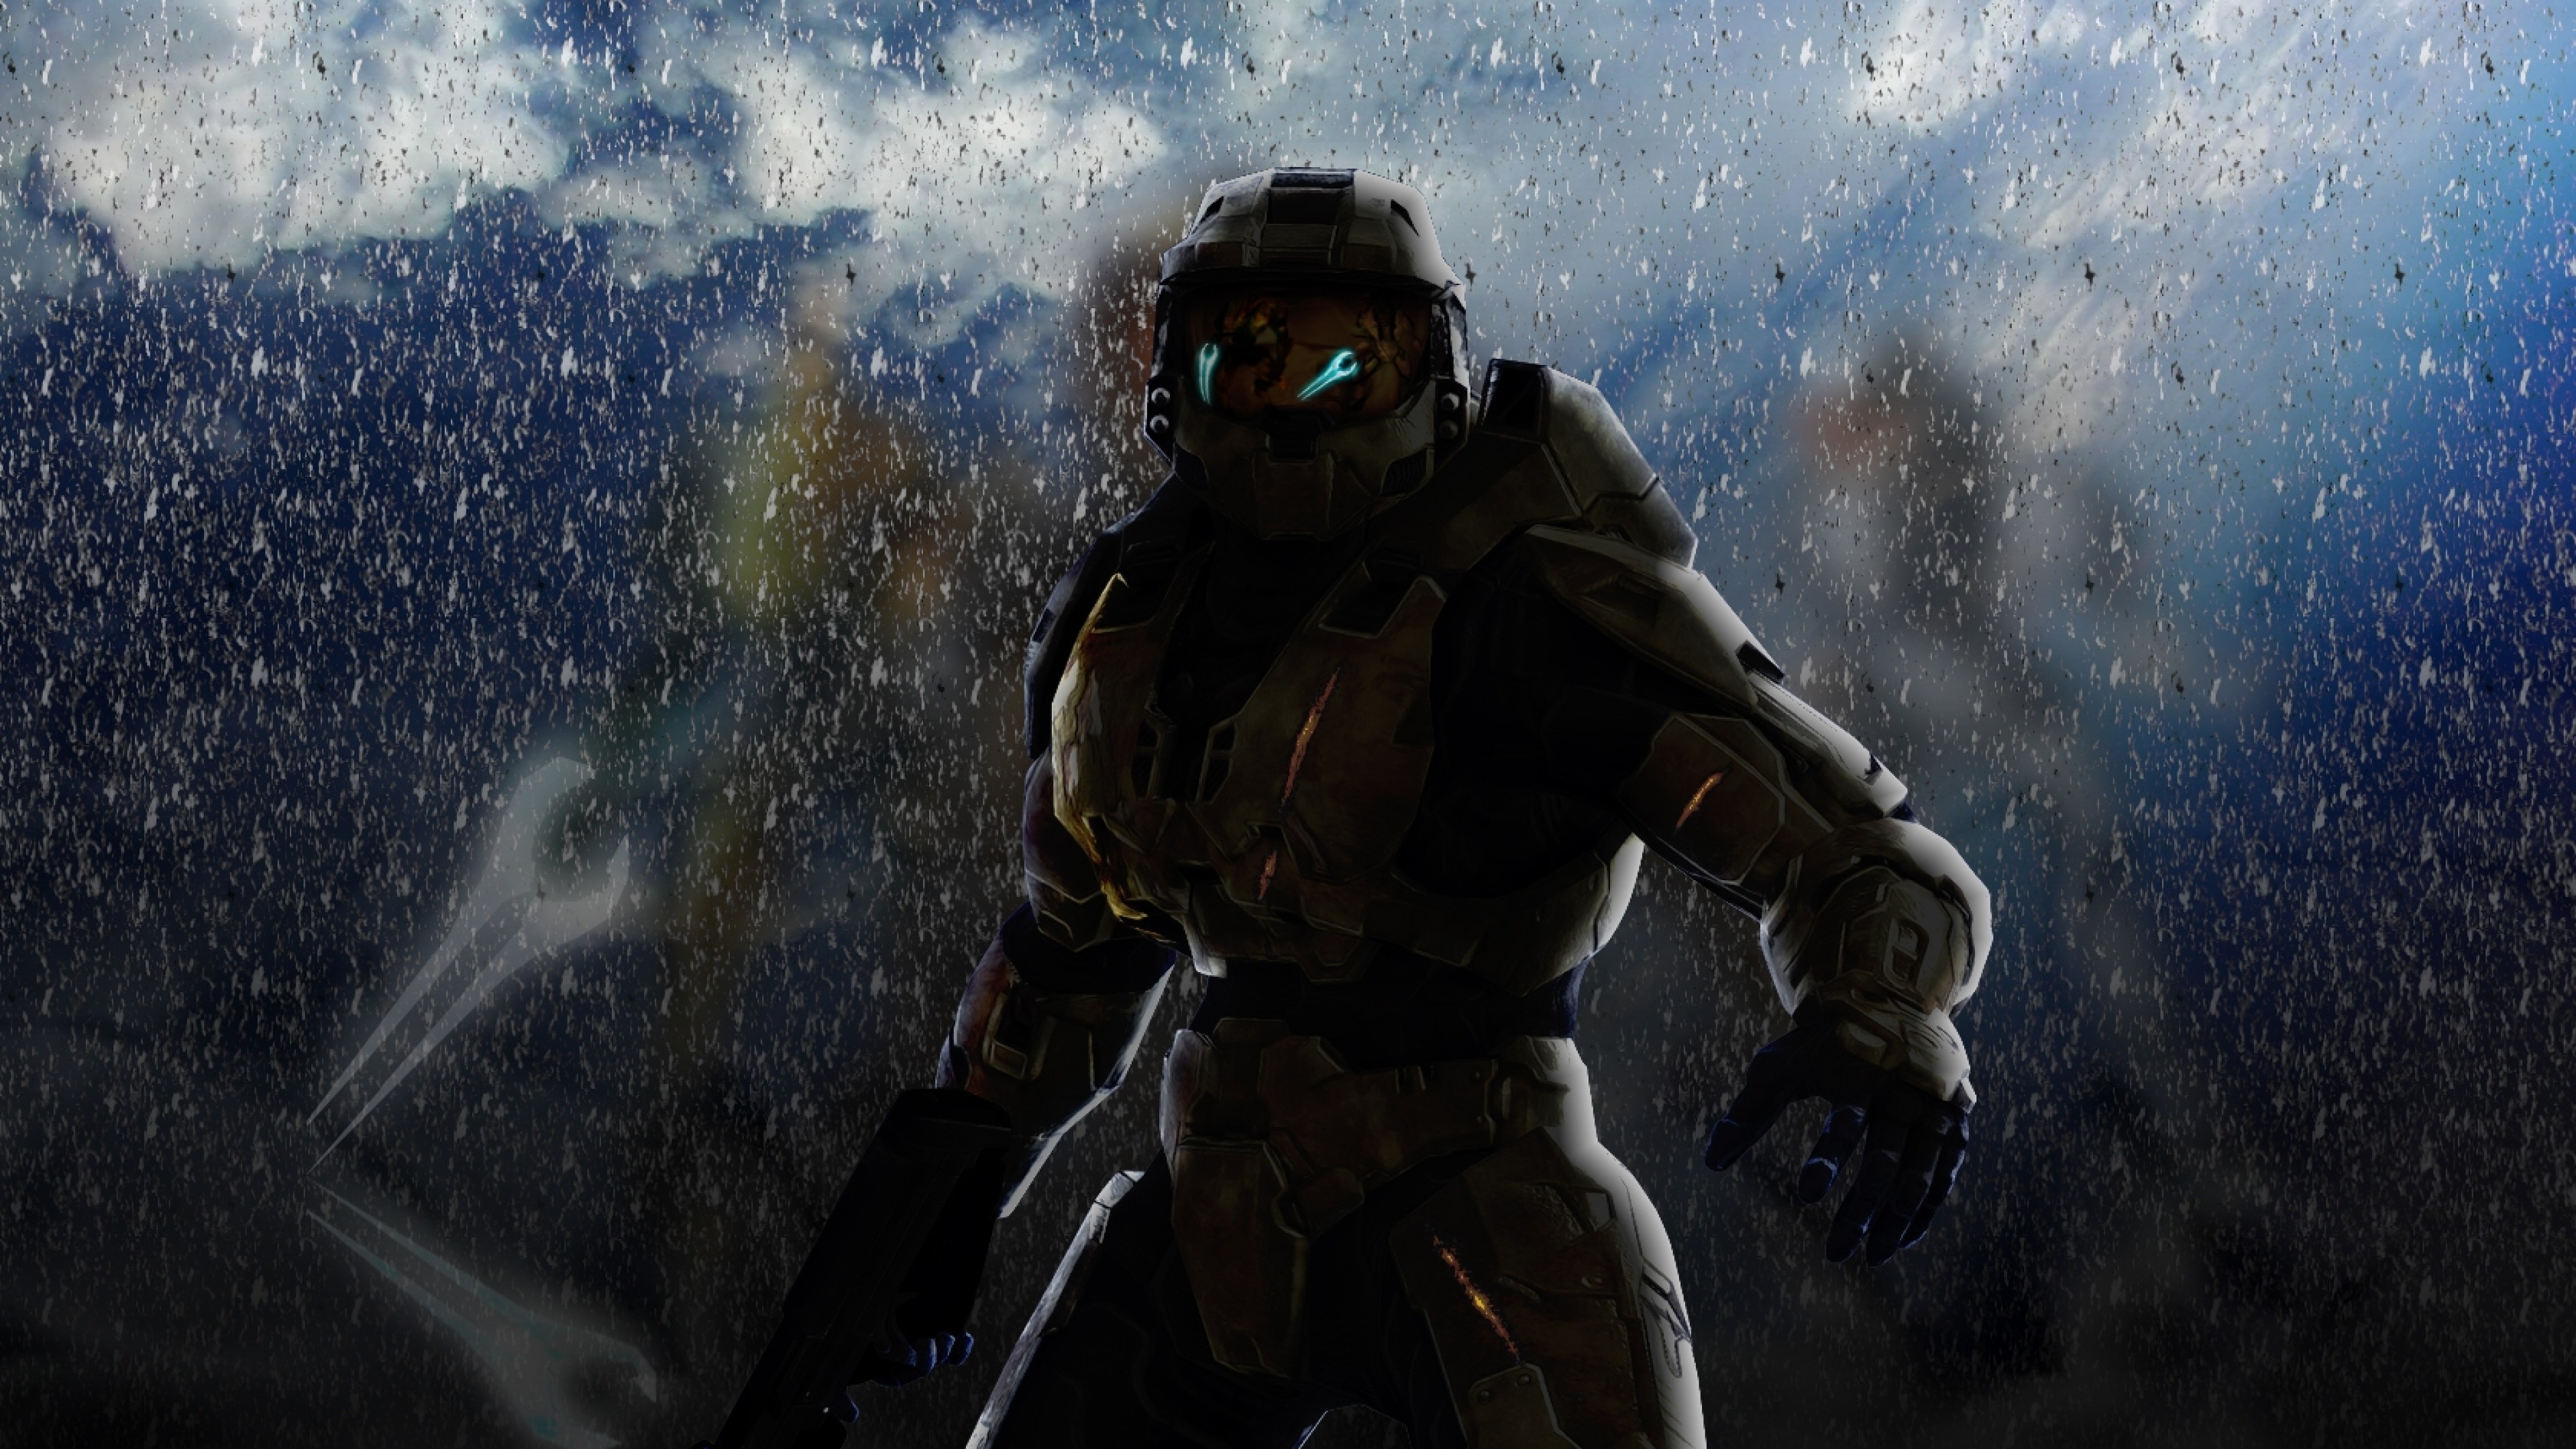 halo wallpapers hd,action adventure game,pc game,fictional character,darkness,cg artwork